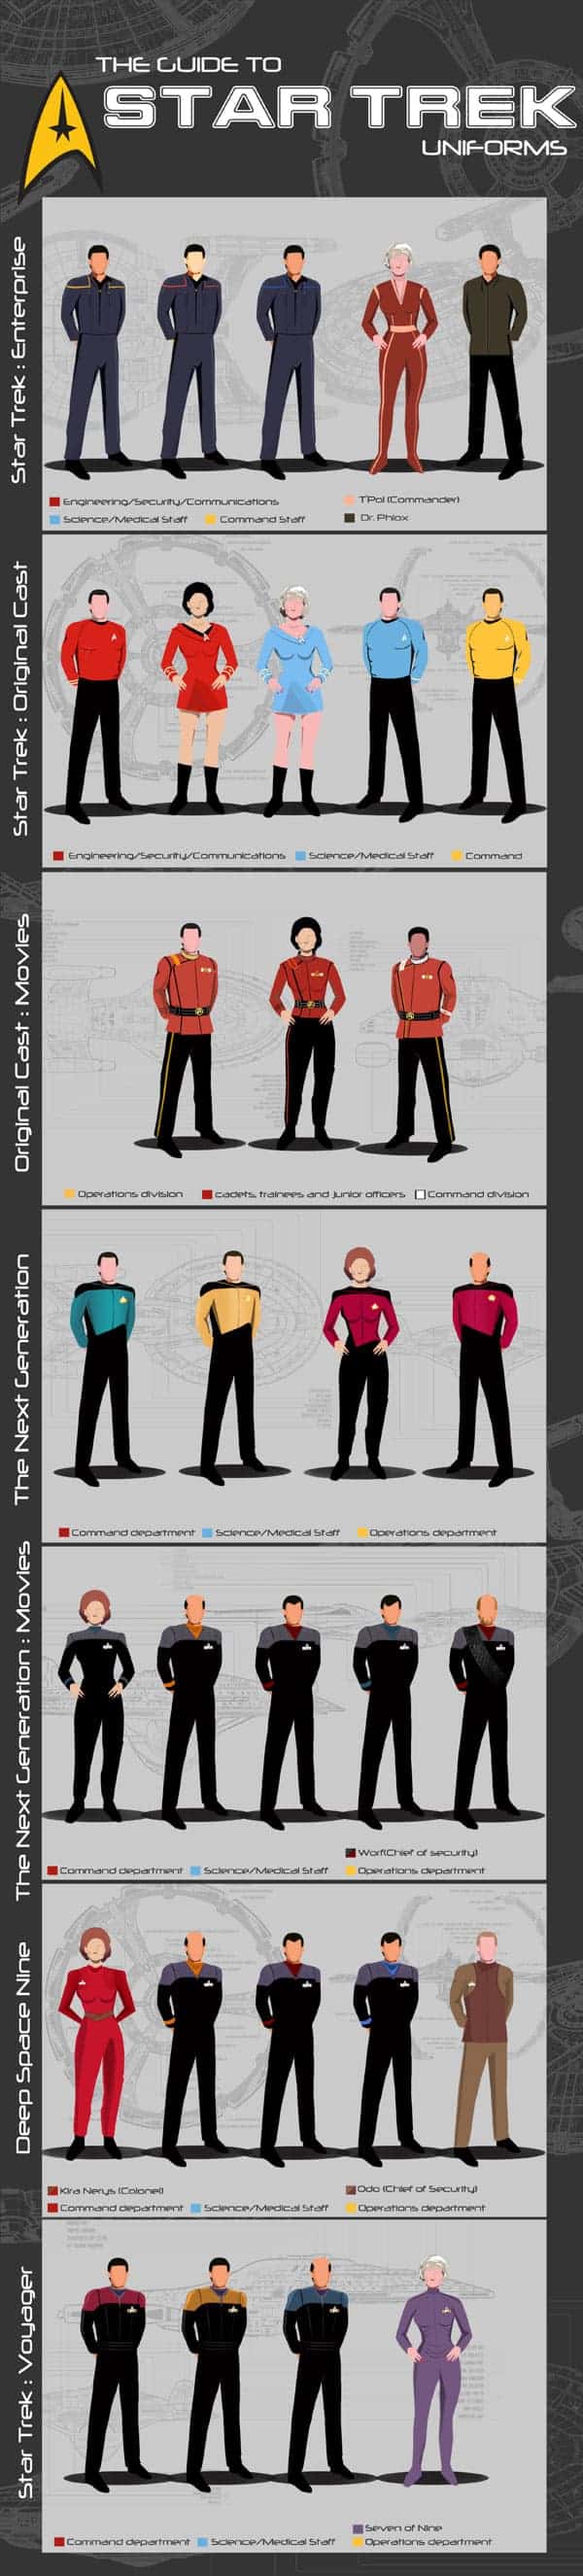 A Guide to Star Trek Uniforms Infographic